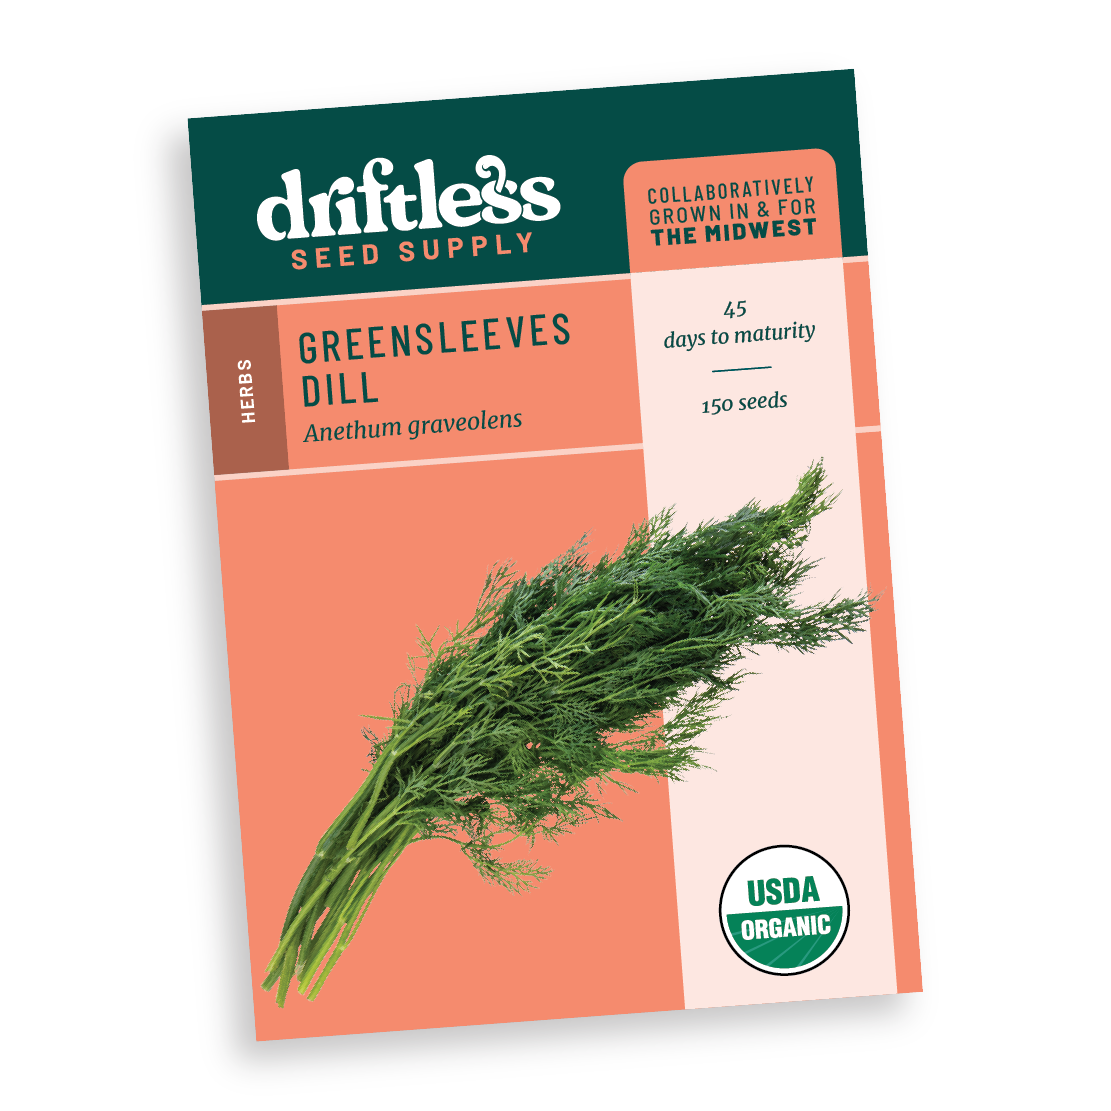 Greensleeves Dill packet face